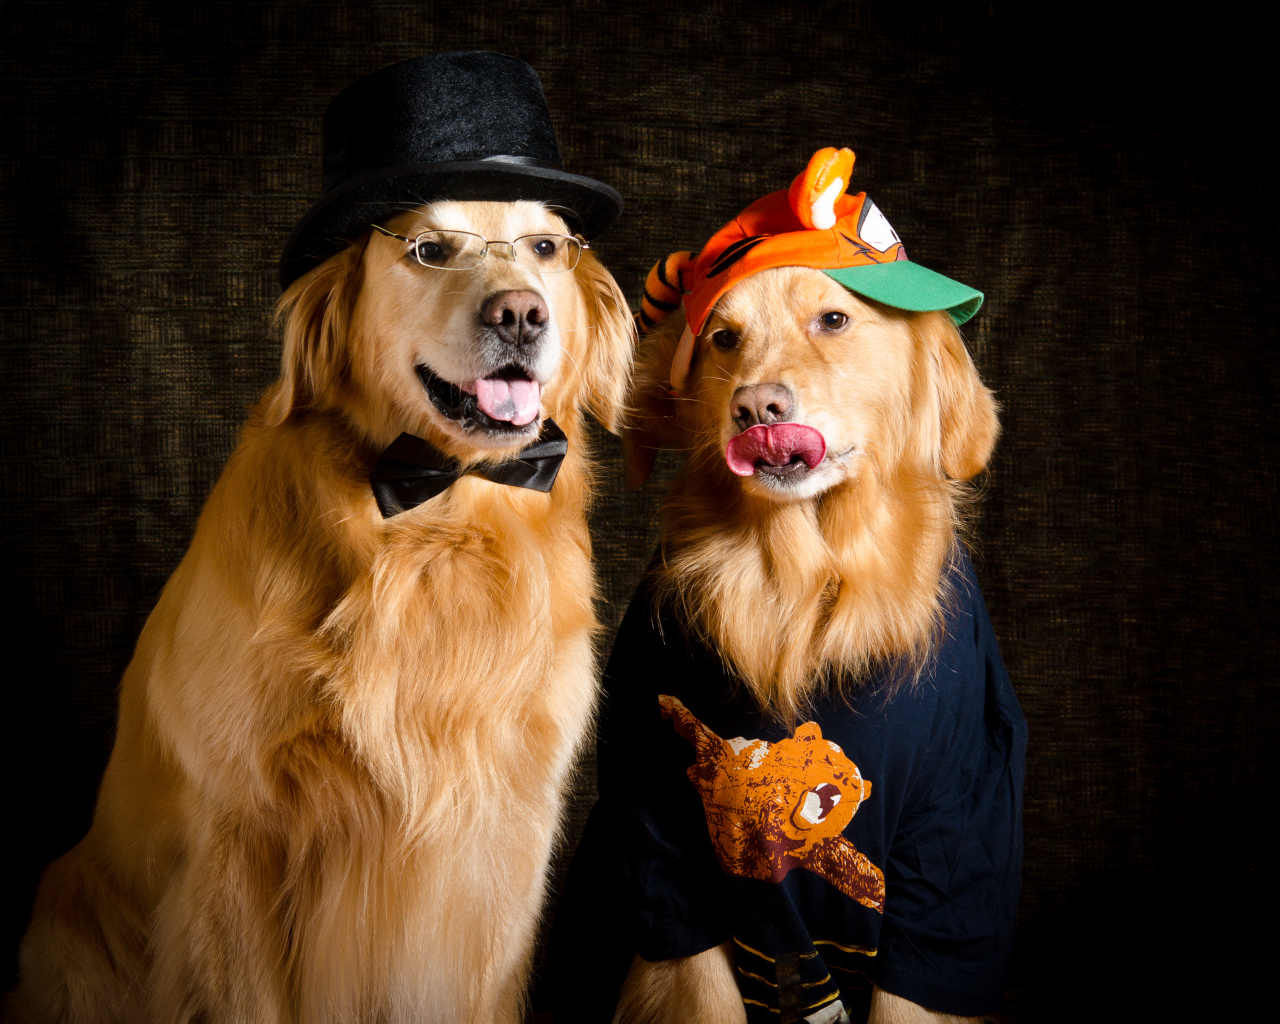 Two fashionable golden retrievers in suits